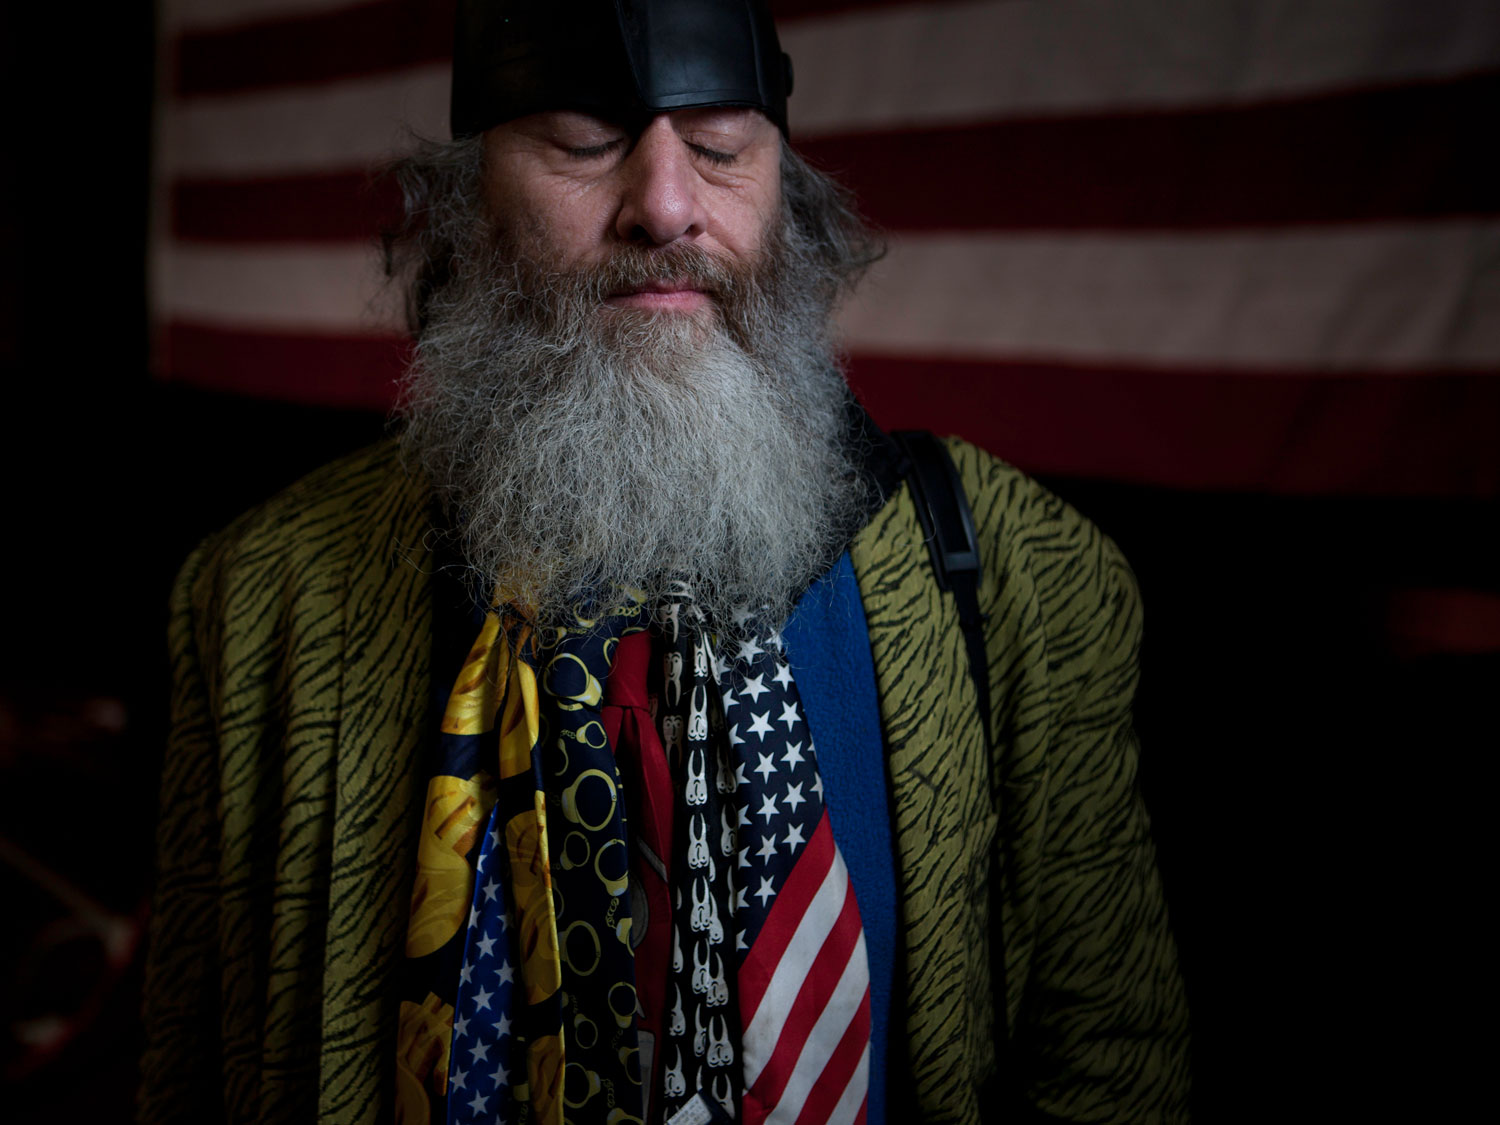 Image: Performance artist and activist Vermin Supreme from Baltimore attends a Mitt Romney rally at Pinkerton Academy in Derry, N.H. He is known for being a satirical candidate in various local, state and national elections in the U.S. Jan. 7, 2012.